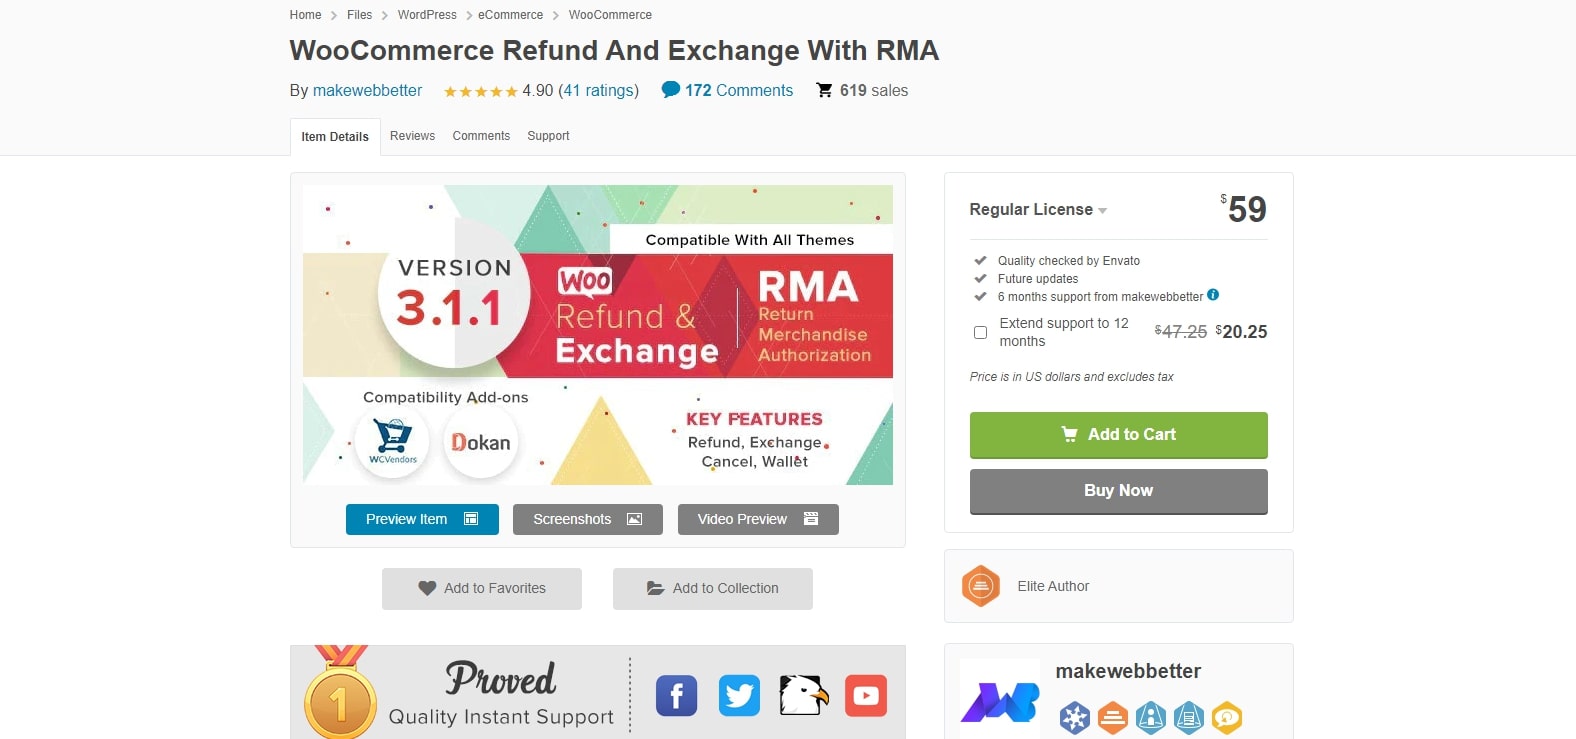 WooCommerce Refund and Exchange with RMA